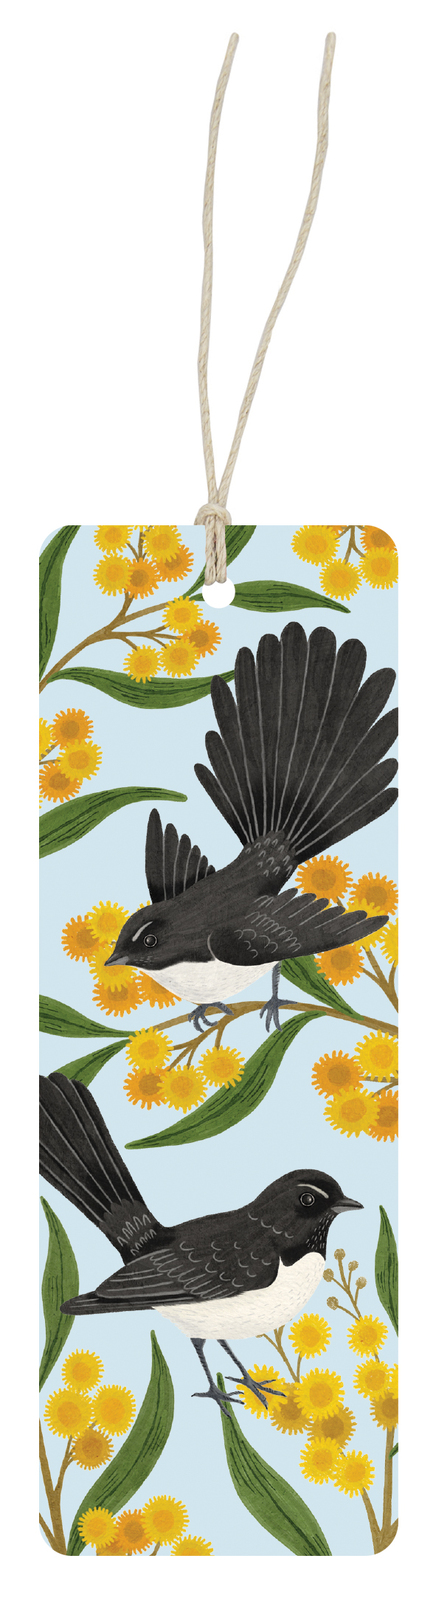 Bookmark - Wagtails & Wattle